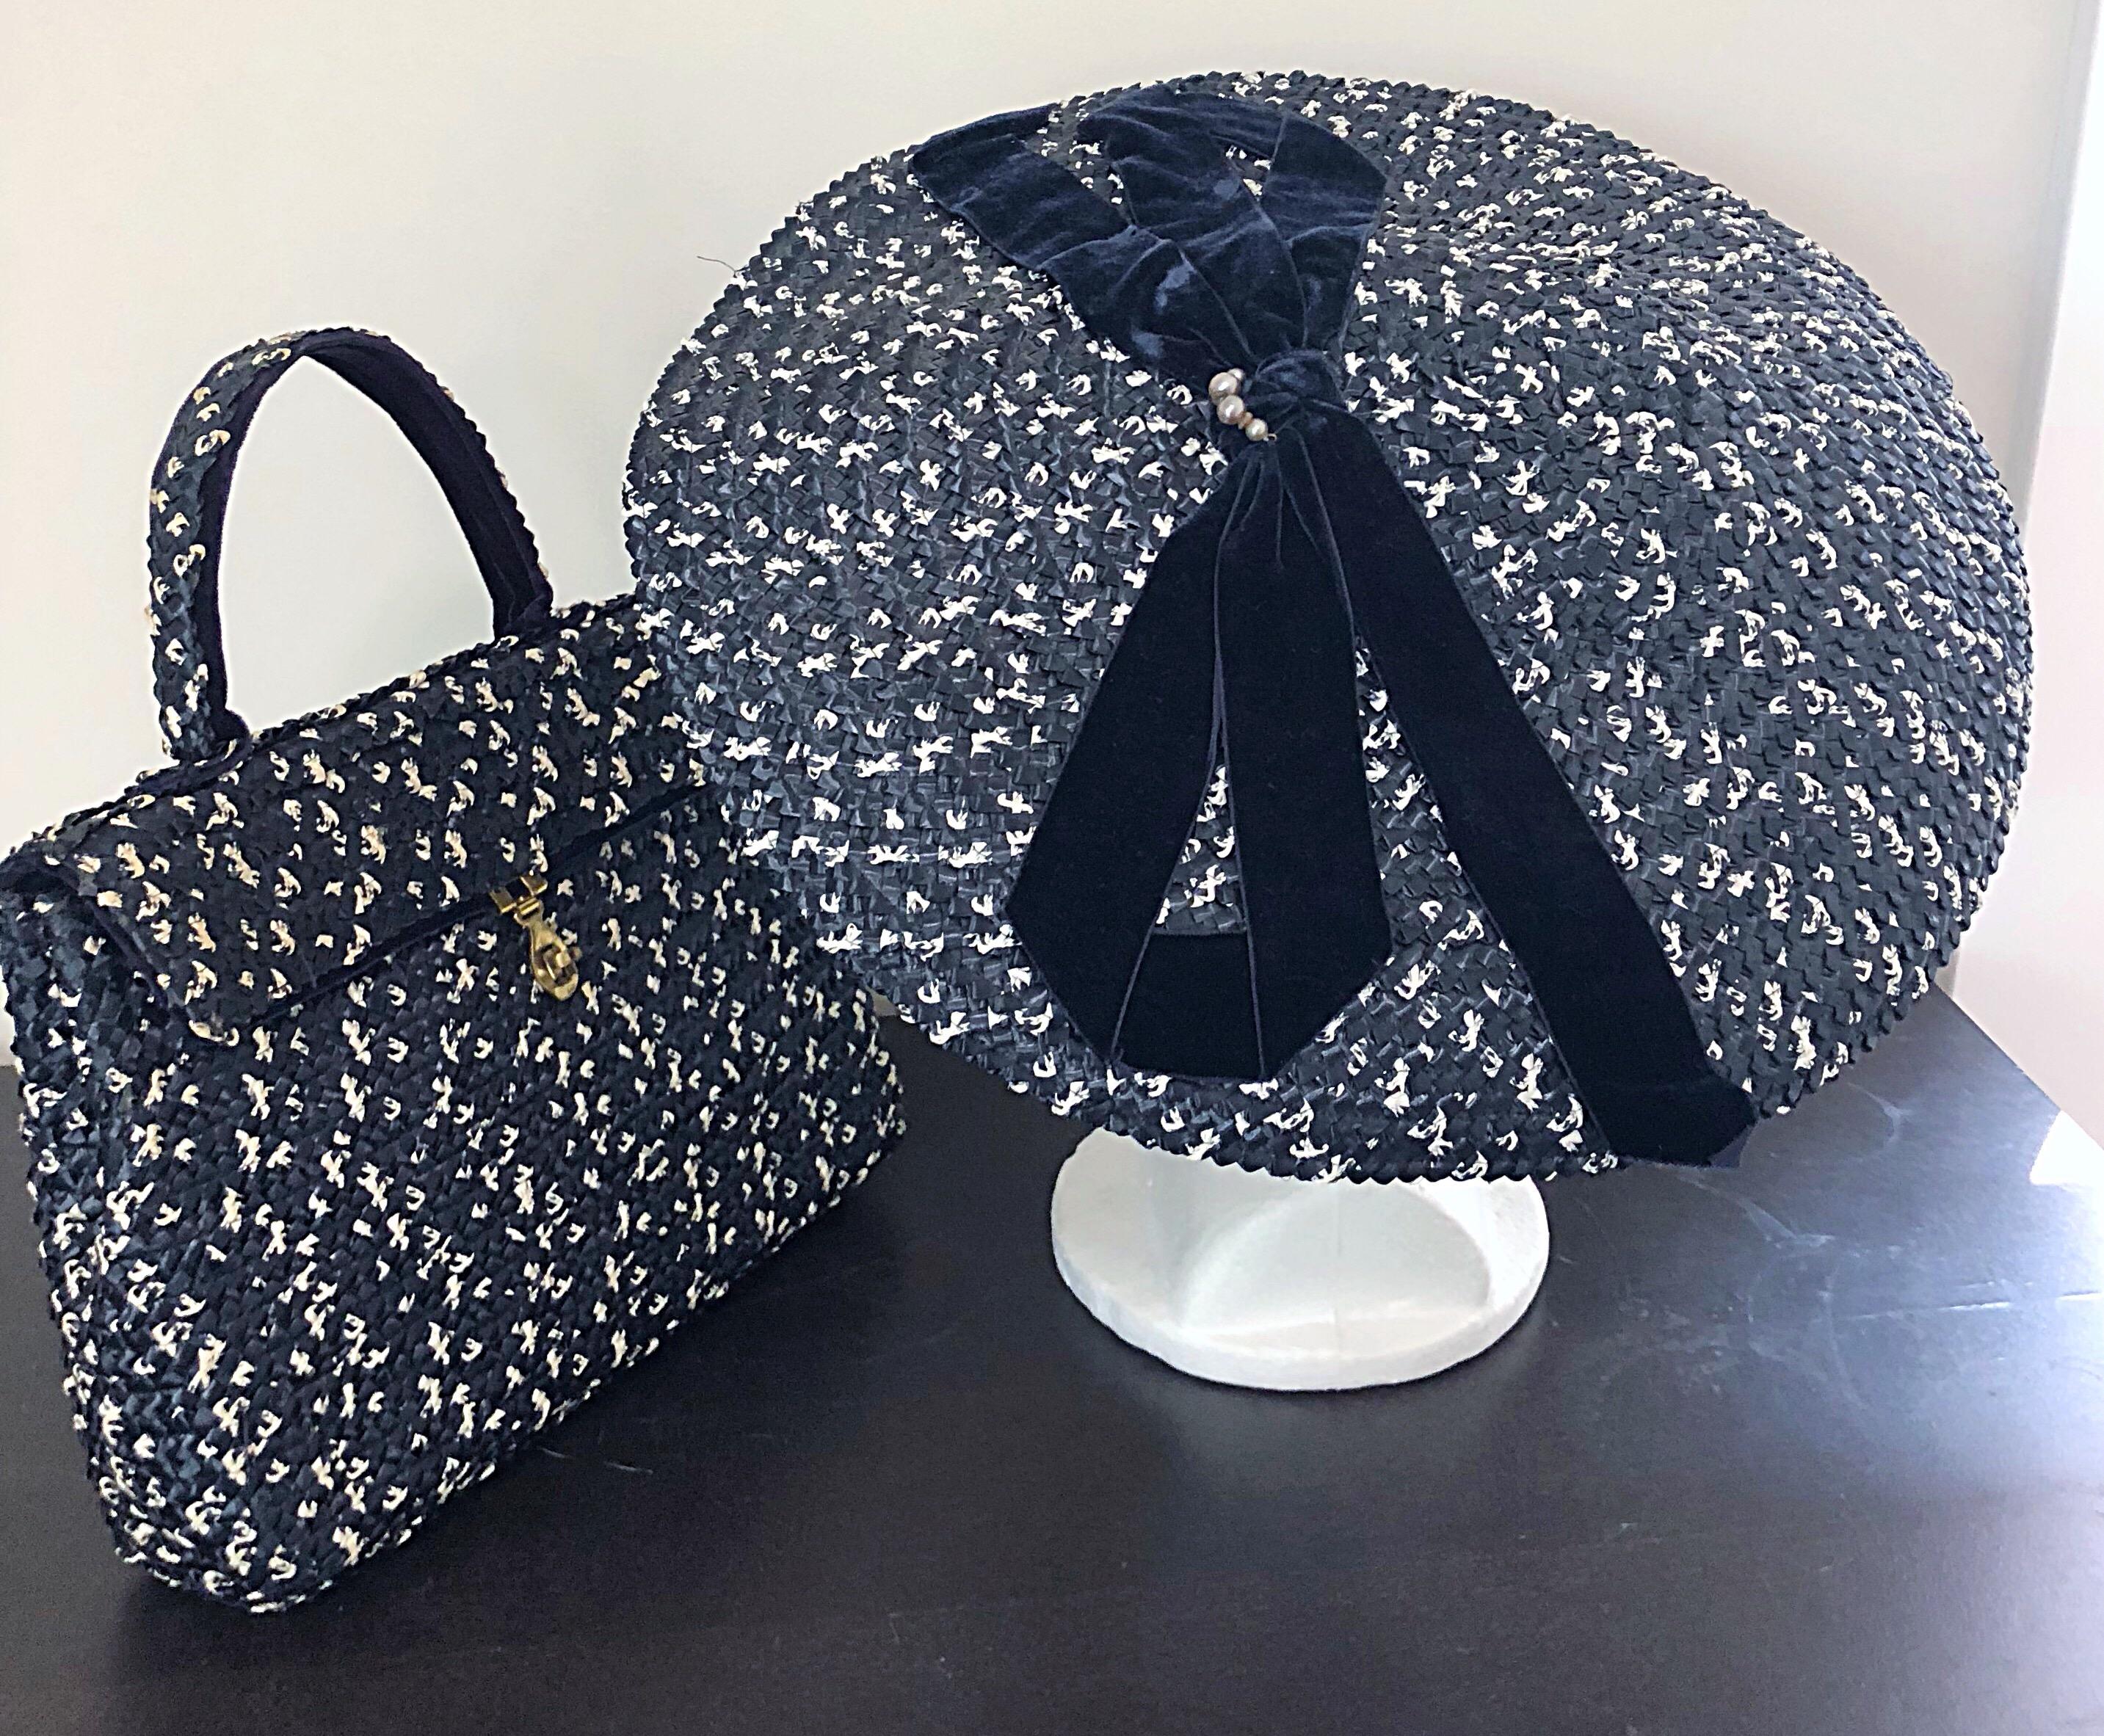 1950s Black and White Pearl Encrusted Vintage 50s Saucer Hat and Purse Bag For Sale 3